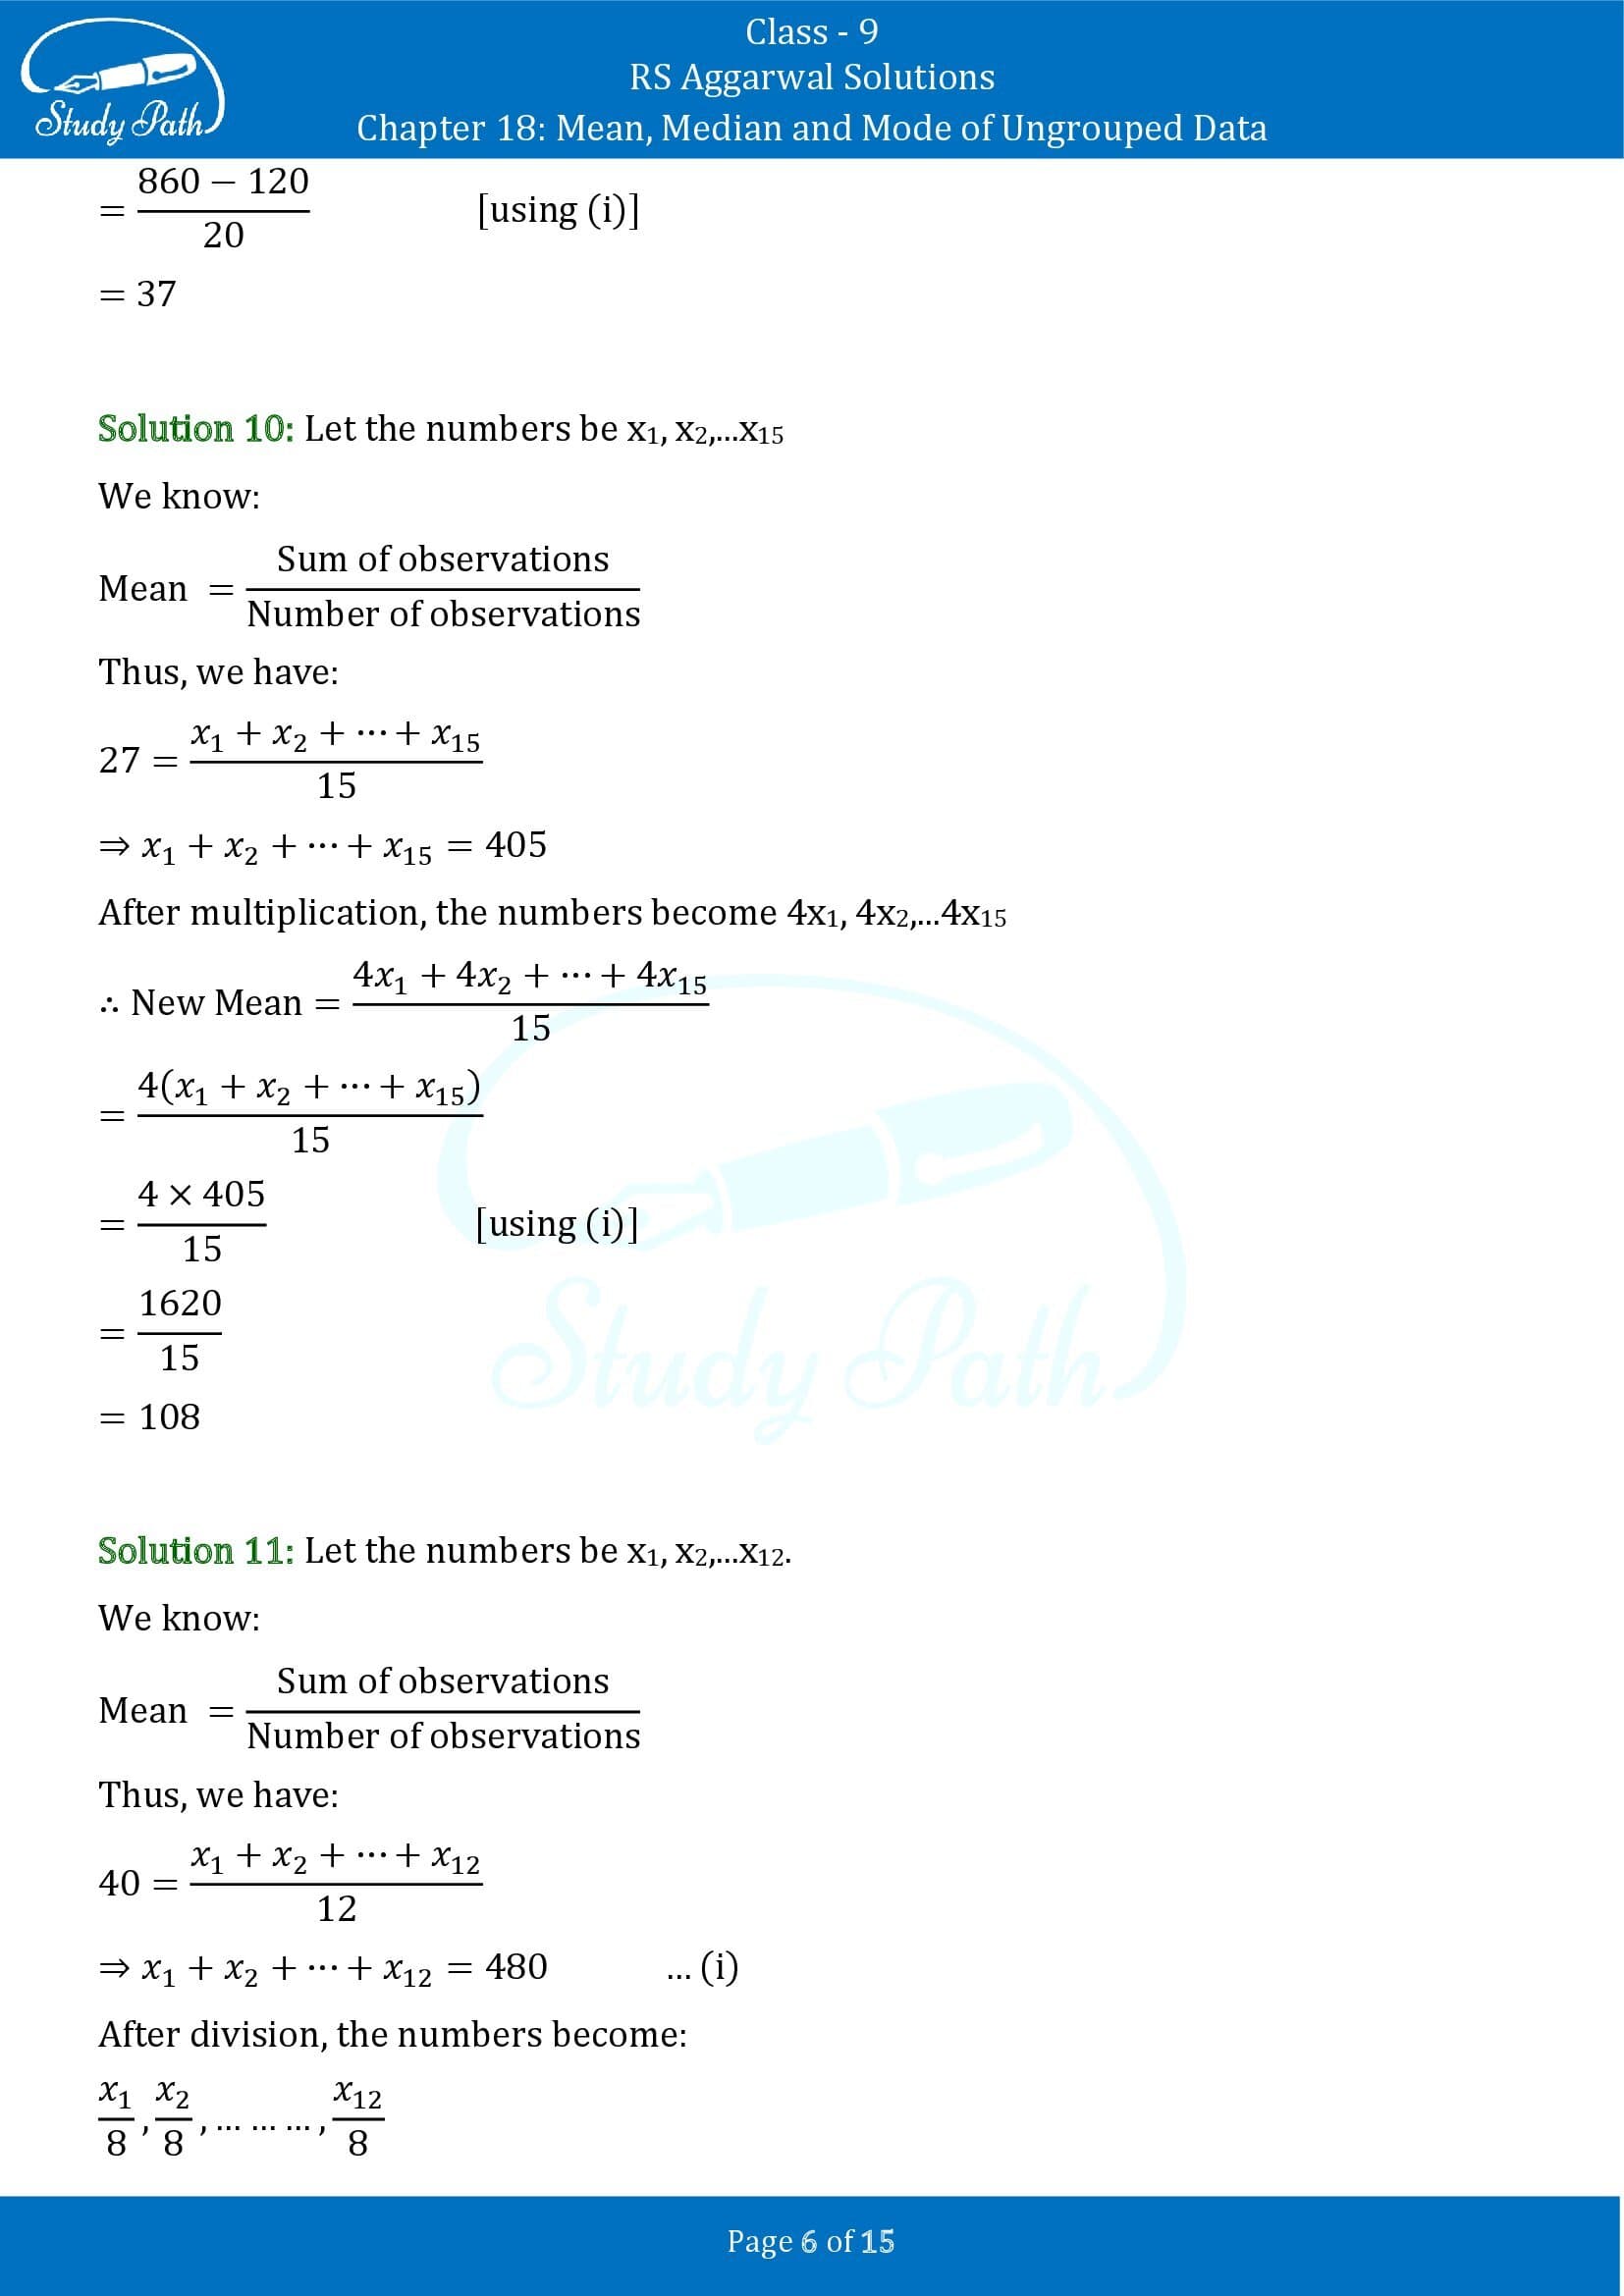 RS Aggarwal Solutions Class 9 Chapter 18 Mean Median and Mode of Ungrouped Data Exercise 18A 00006